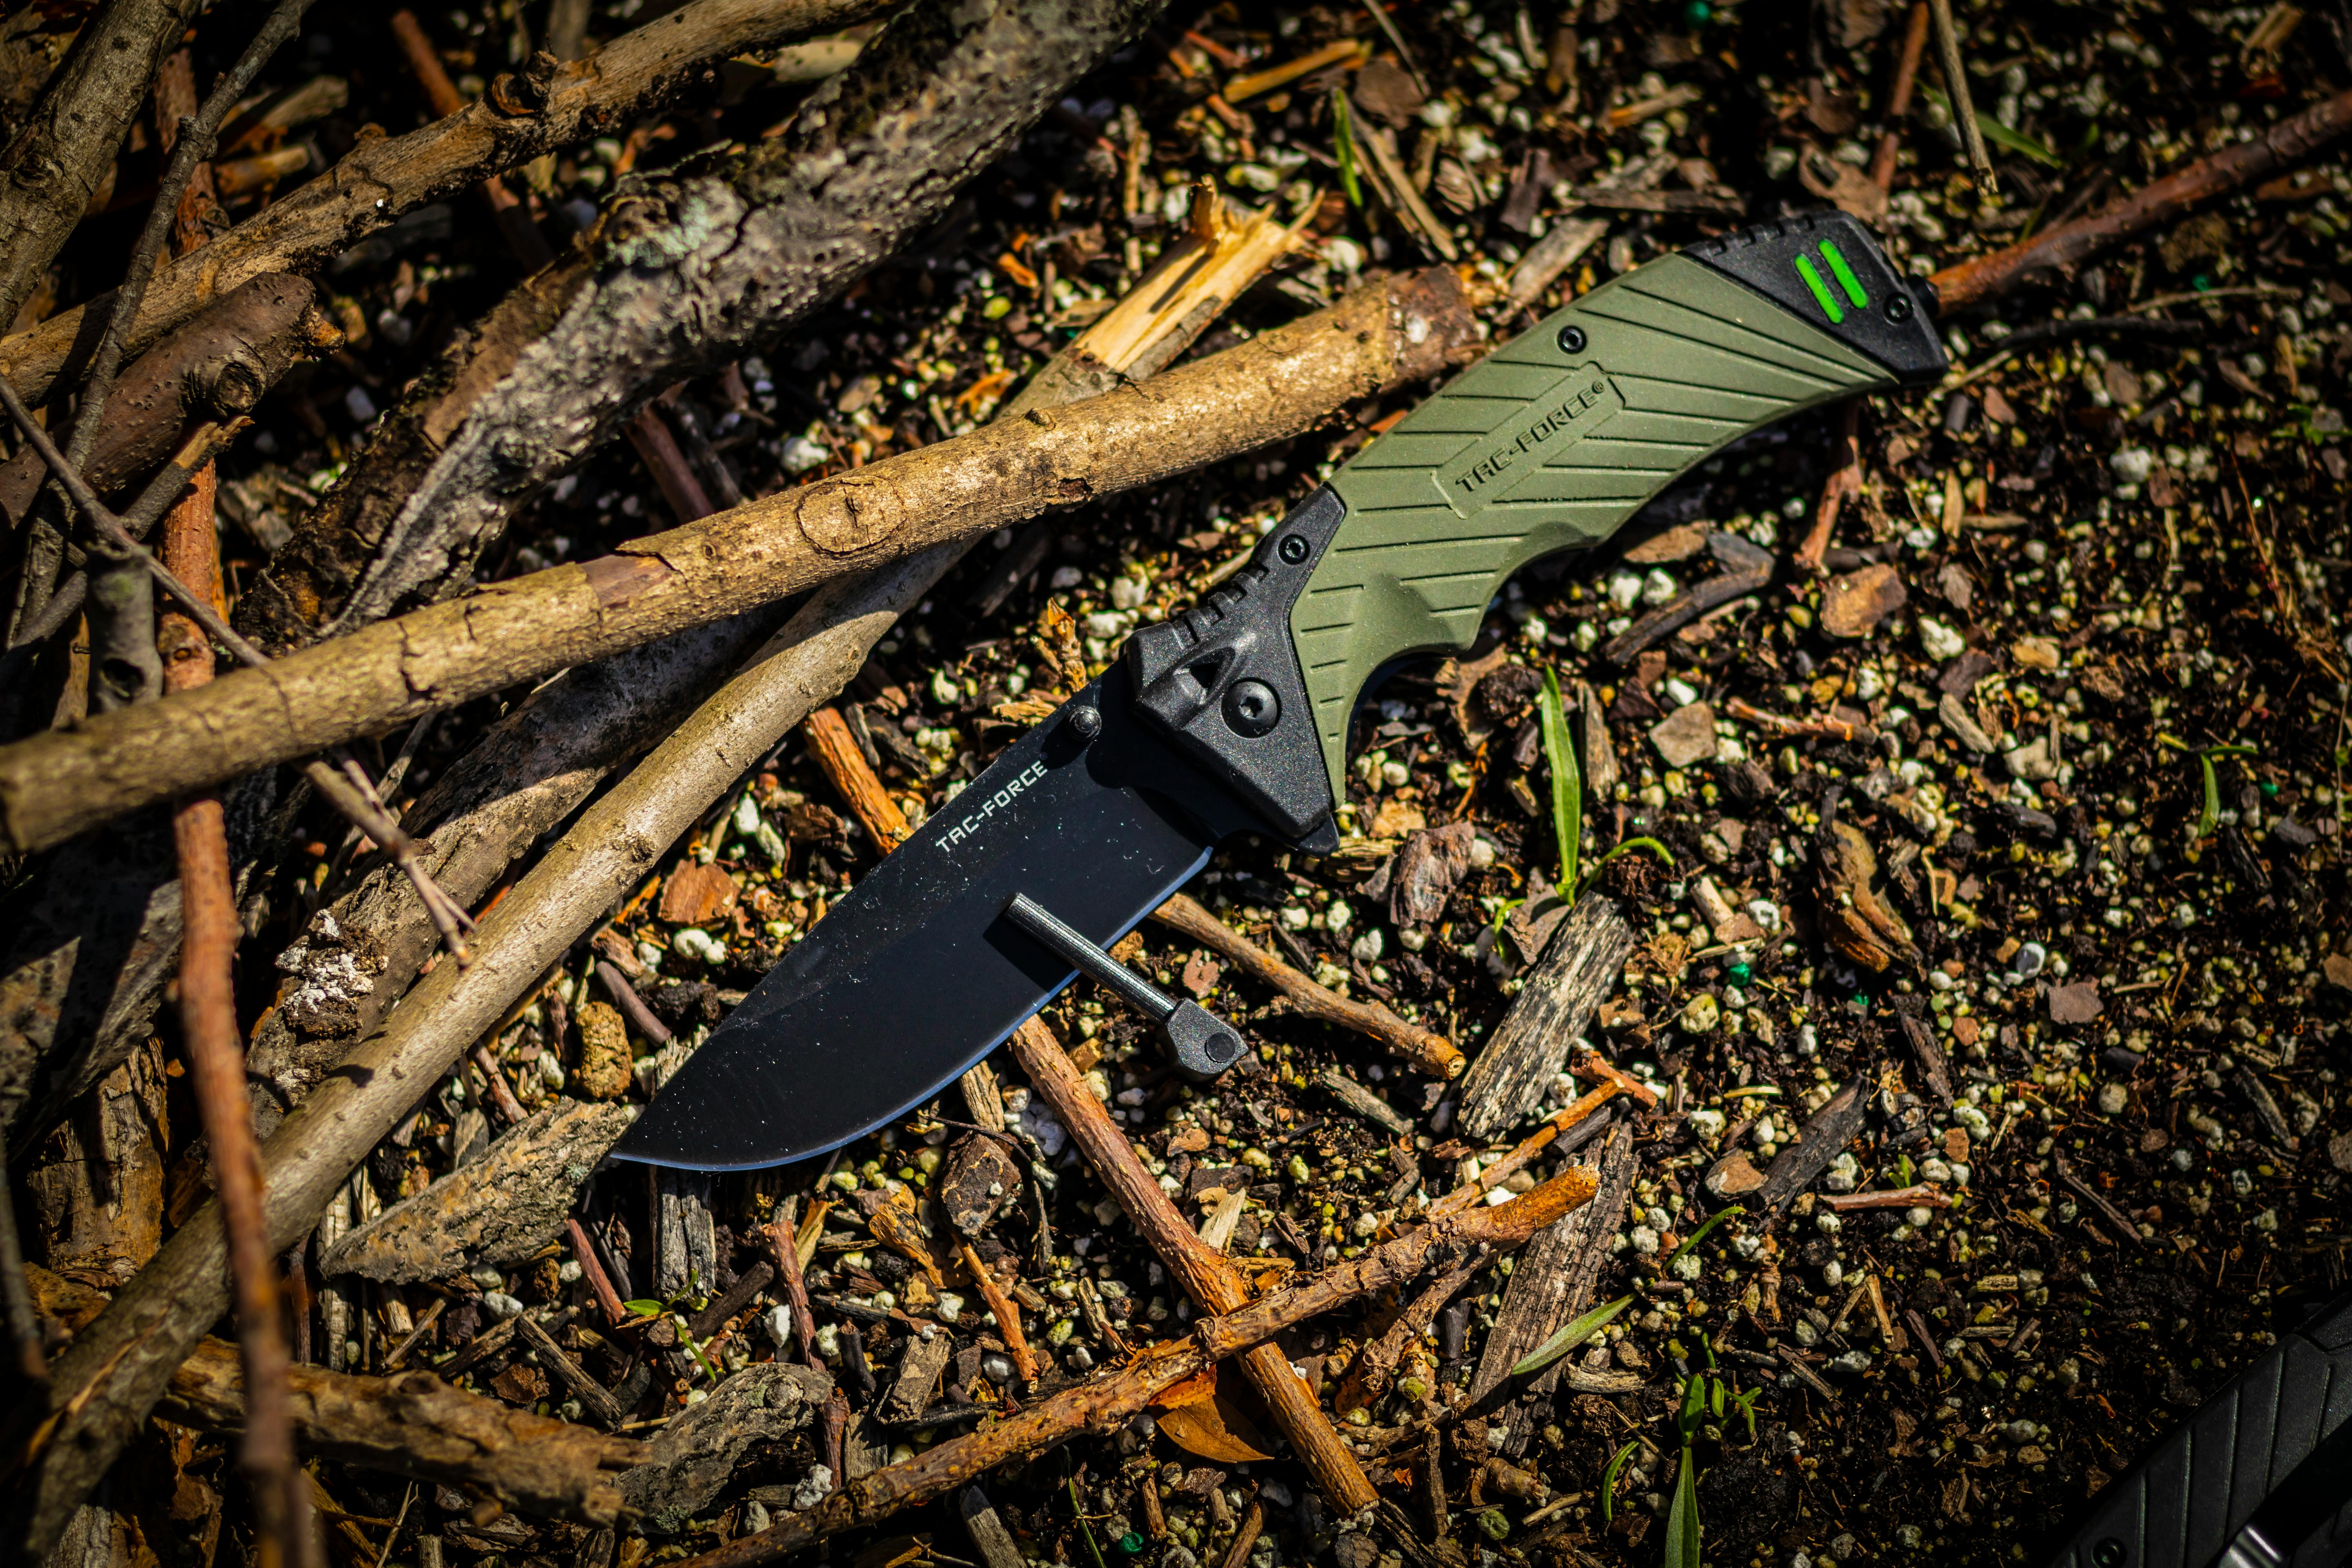 Free stock photo of tac-force spring assisted pocket knife